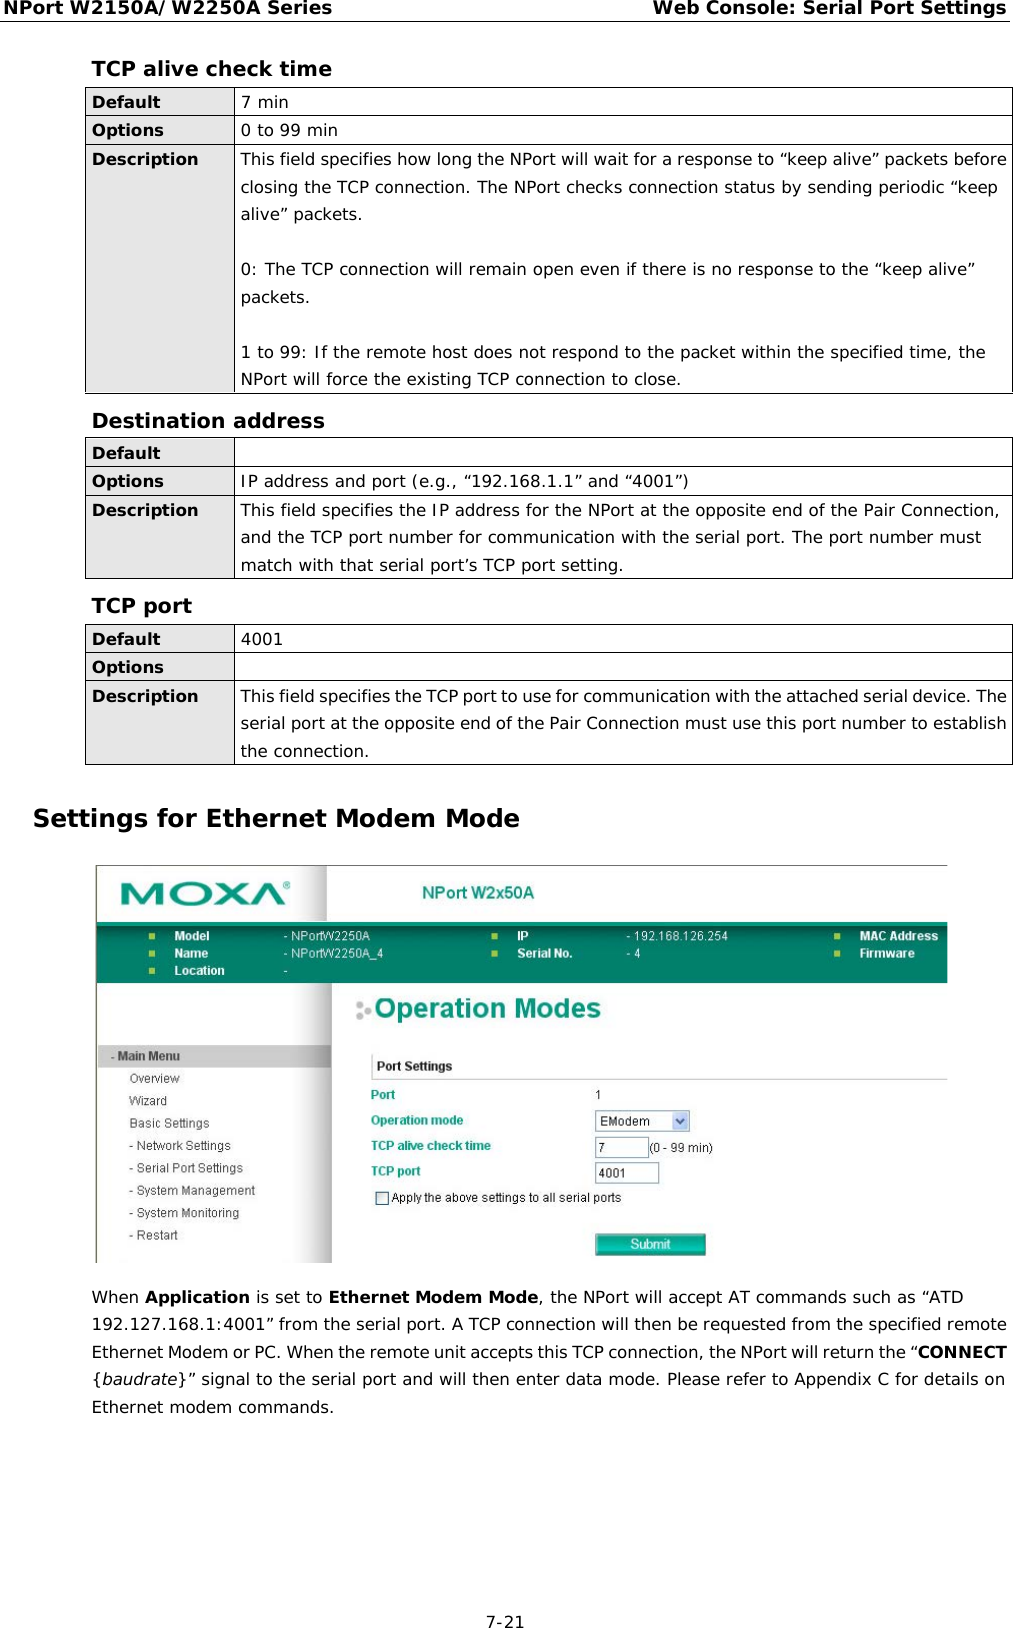 NPort W2150A/W2250A Series Web Console: Serial Port Settings  7-21 TCP alive check time Default 7 min Options 0 to 99 min Description This field specifies how long the NPort will wait for a response to “keep alive” packets before closing the TCP connection. The NPort checks connection status by sending periodic “keep alive” packets.   0: The TCP connection will remain open even if there is no response to the “keep alive” packets.  1 to 99: If the remote host does not respond to the packet within the specified time, the NPort will force the existing TCP connection to close. Destination address Default  Options IP address and port (e.g., “192.168.1.1” and “4001”) Description This field specifies the IP address for the NPort at the opposite end of the Pair Connection, and the TCP port number for communication with the serial port. The port number must match with that serial port’s TCP port setting.  TCP port Default 4001 Options  Description This field specifies the TCP port to use for communication with the attached serial device. The serial port at the opposite end of the Pair Connection must use this port number to establish the connection. Settings for Ethernet Modem Mode  When Application is set to Ethernet Modem Mode, the NPort will accept AT commands such as “ATD 192.127.168.1:4001” from the serial port. A TCP connection will then be requested from the specified remote Ethernet Modem or PC. When the remote unit accepts this TCP connection, the NPort will return the “CONNECT {baudrate}” signal to the serial port and will then enter data mode. Please refer to Appendix C for details on Ethernet modem commands.    